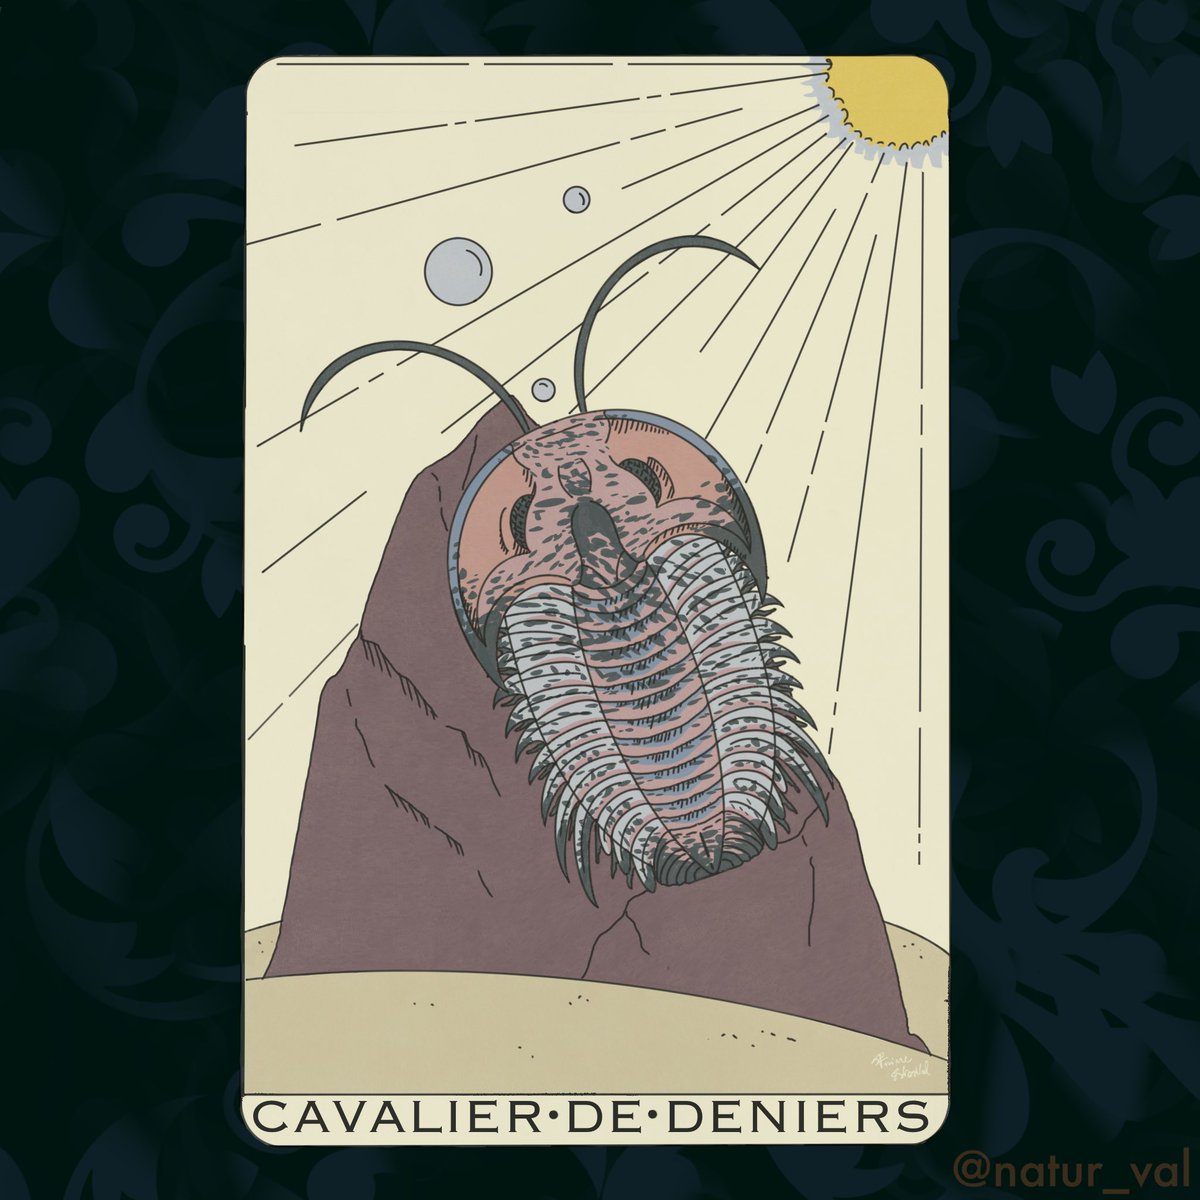 Tarots Before Time - Cavalier de Deniers (Knight of Pentacles). Once again I chose an armored creature from the distant Lower Cambrian: a trilobite. These marine arthropods lived on this planet for approximately 270 million years, an important guide fossils for the Paleozoic era.